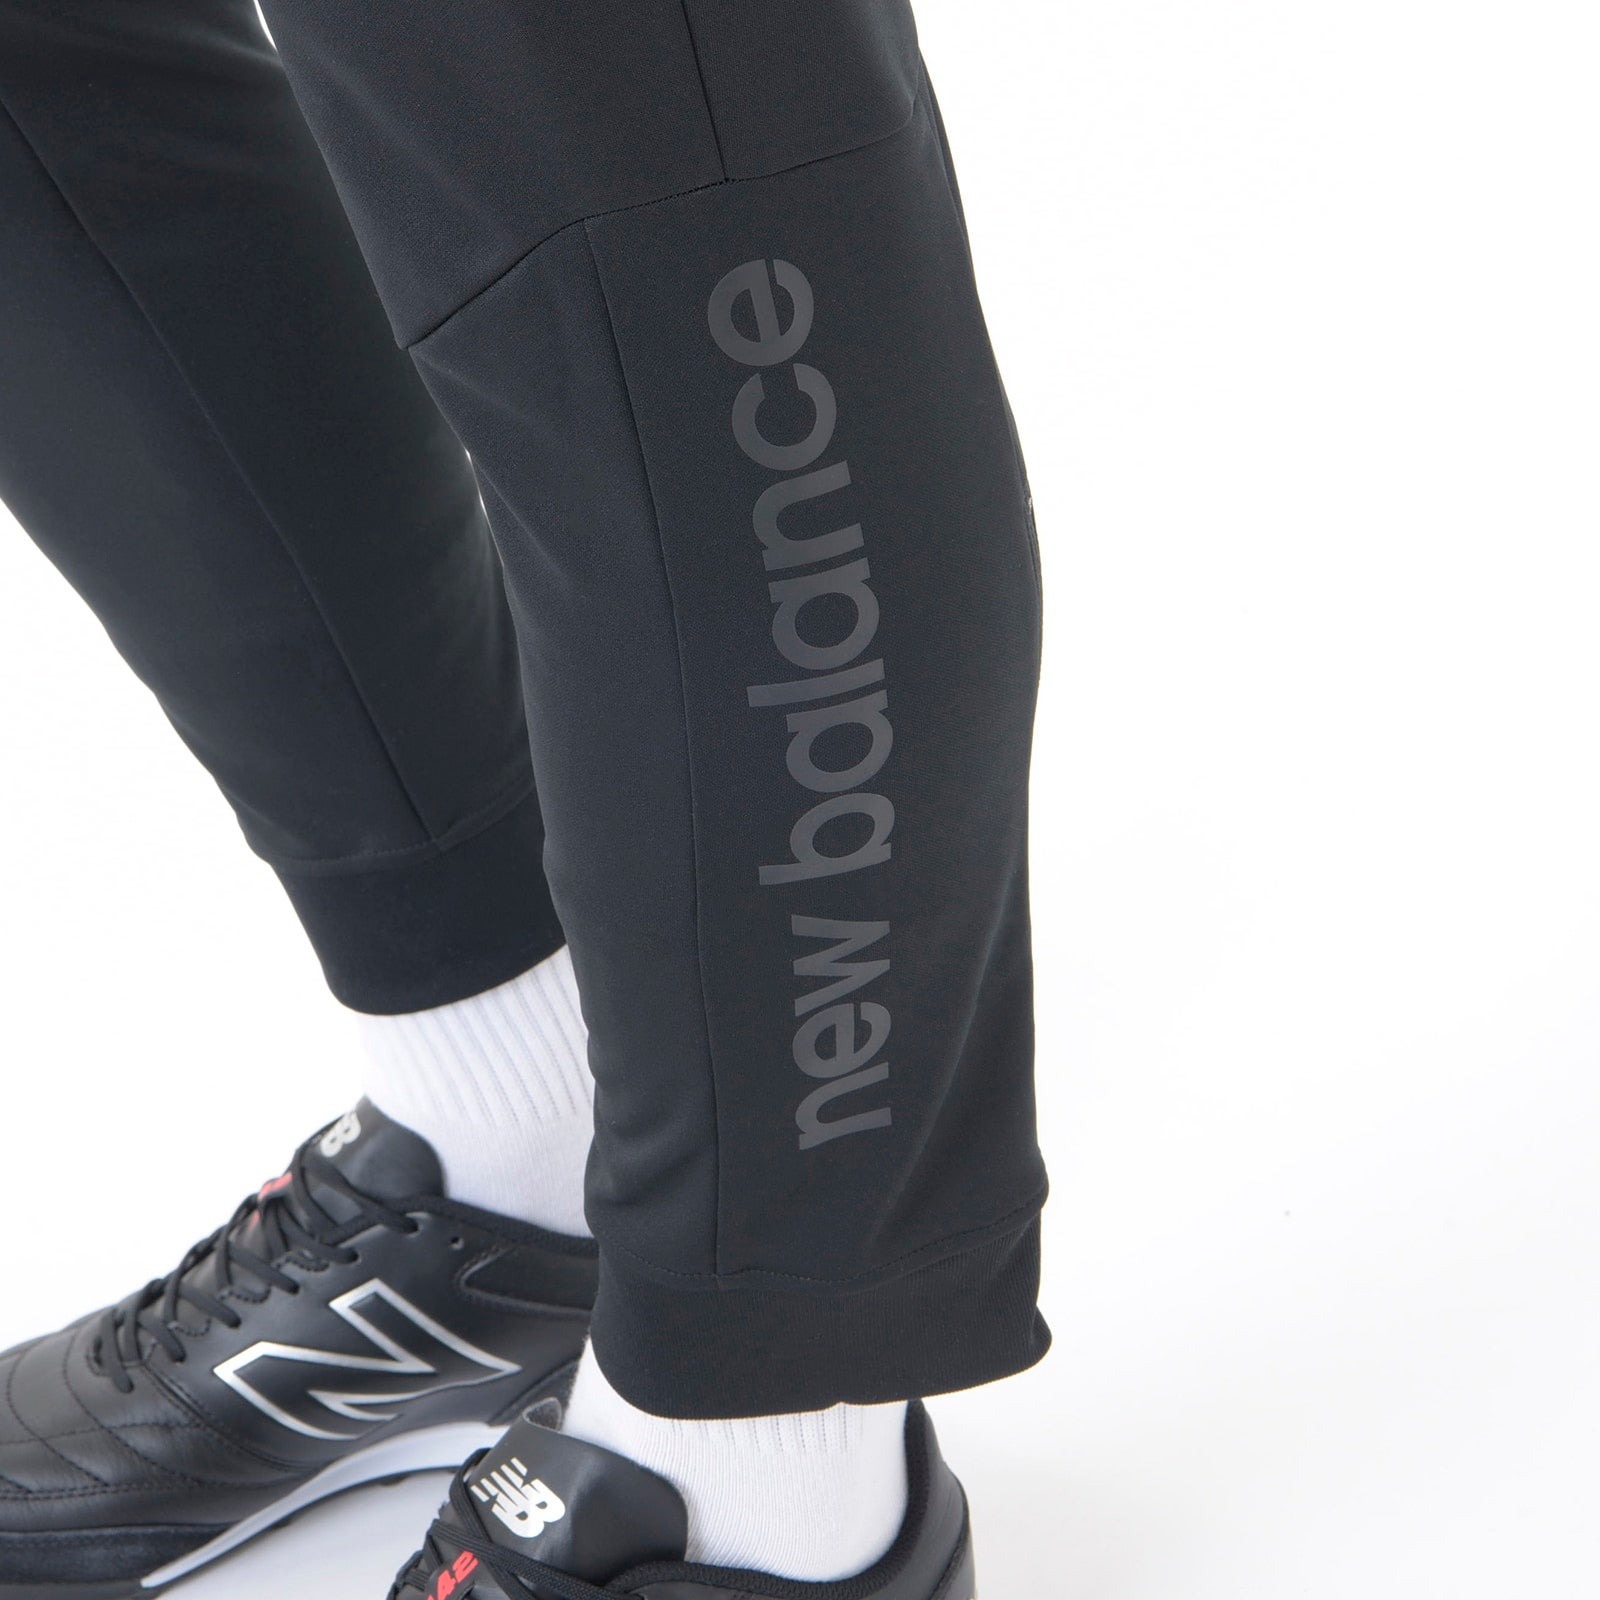 Black Out Collection Warm-up Performance Pants Slim Fit